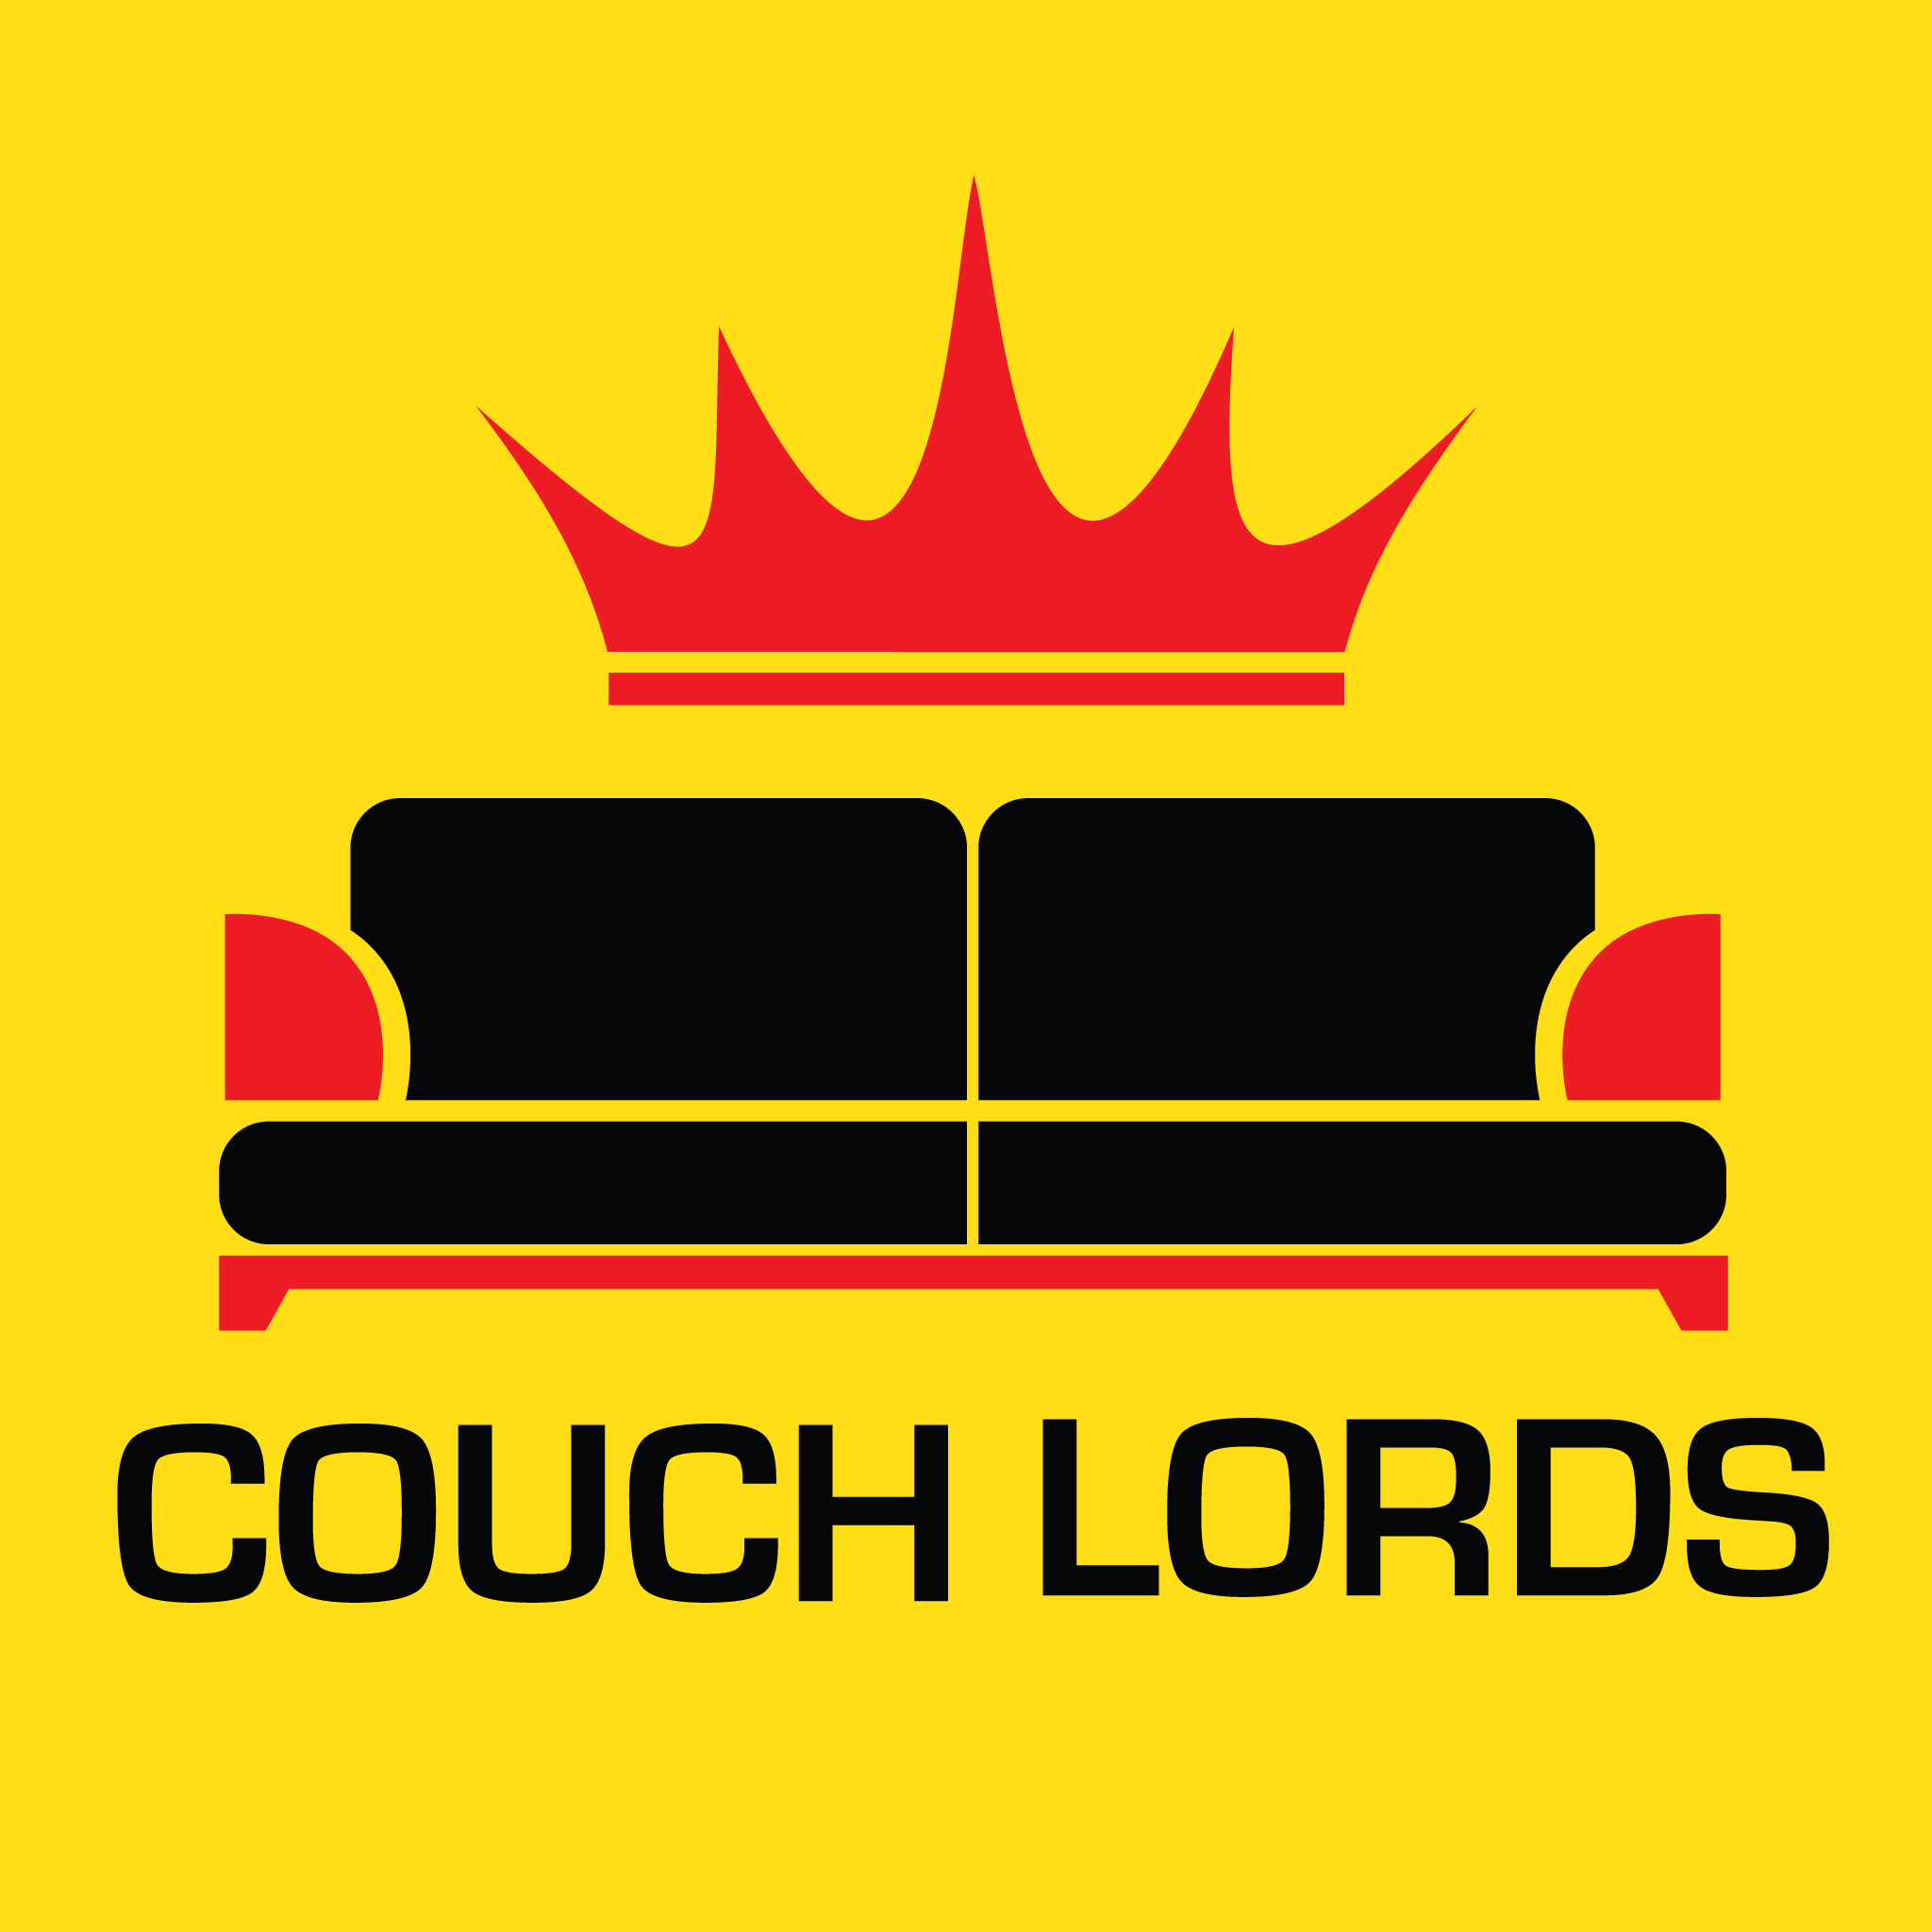 Couch Lords